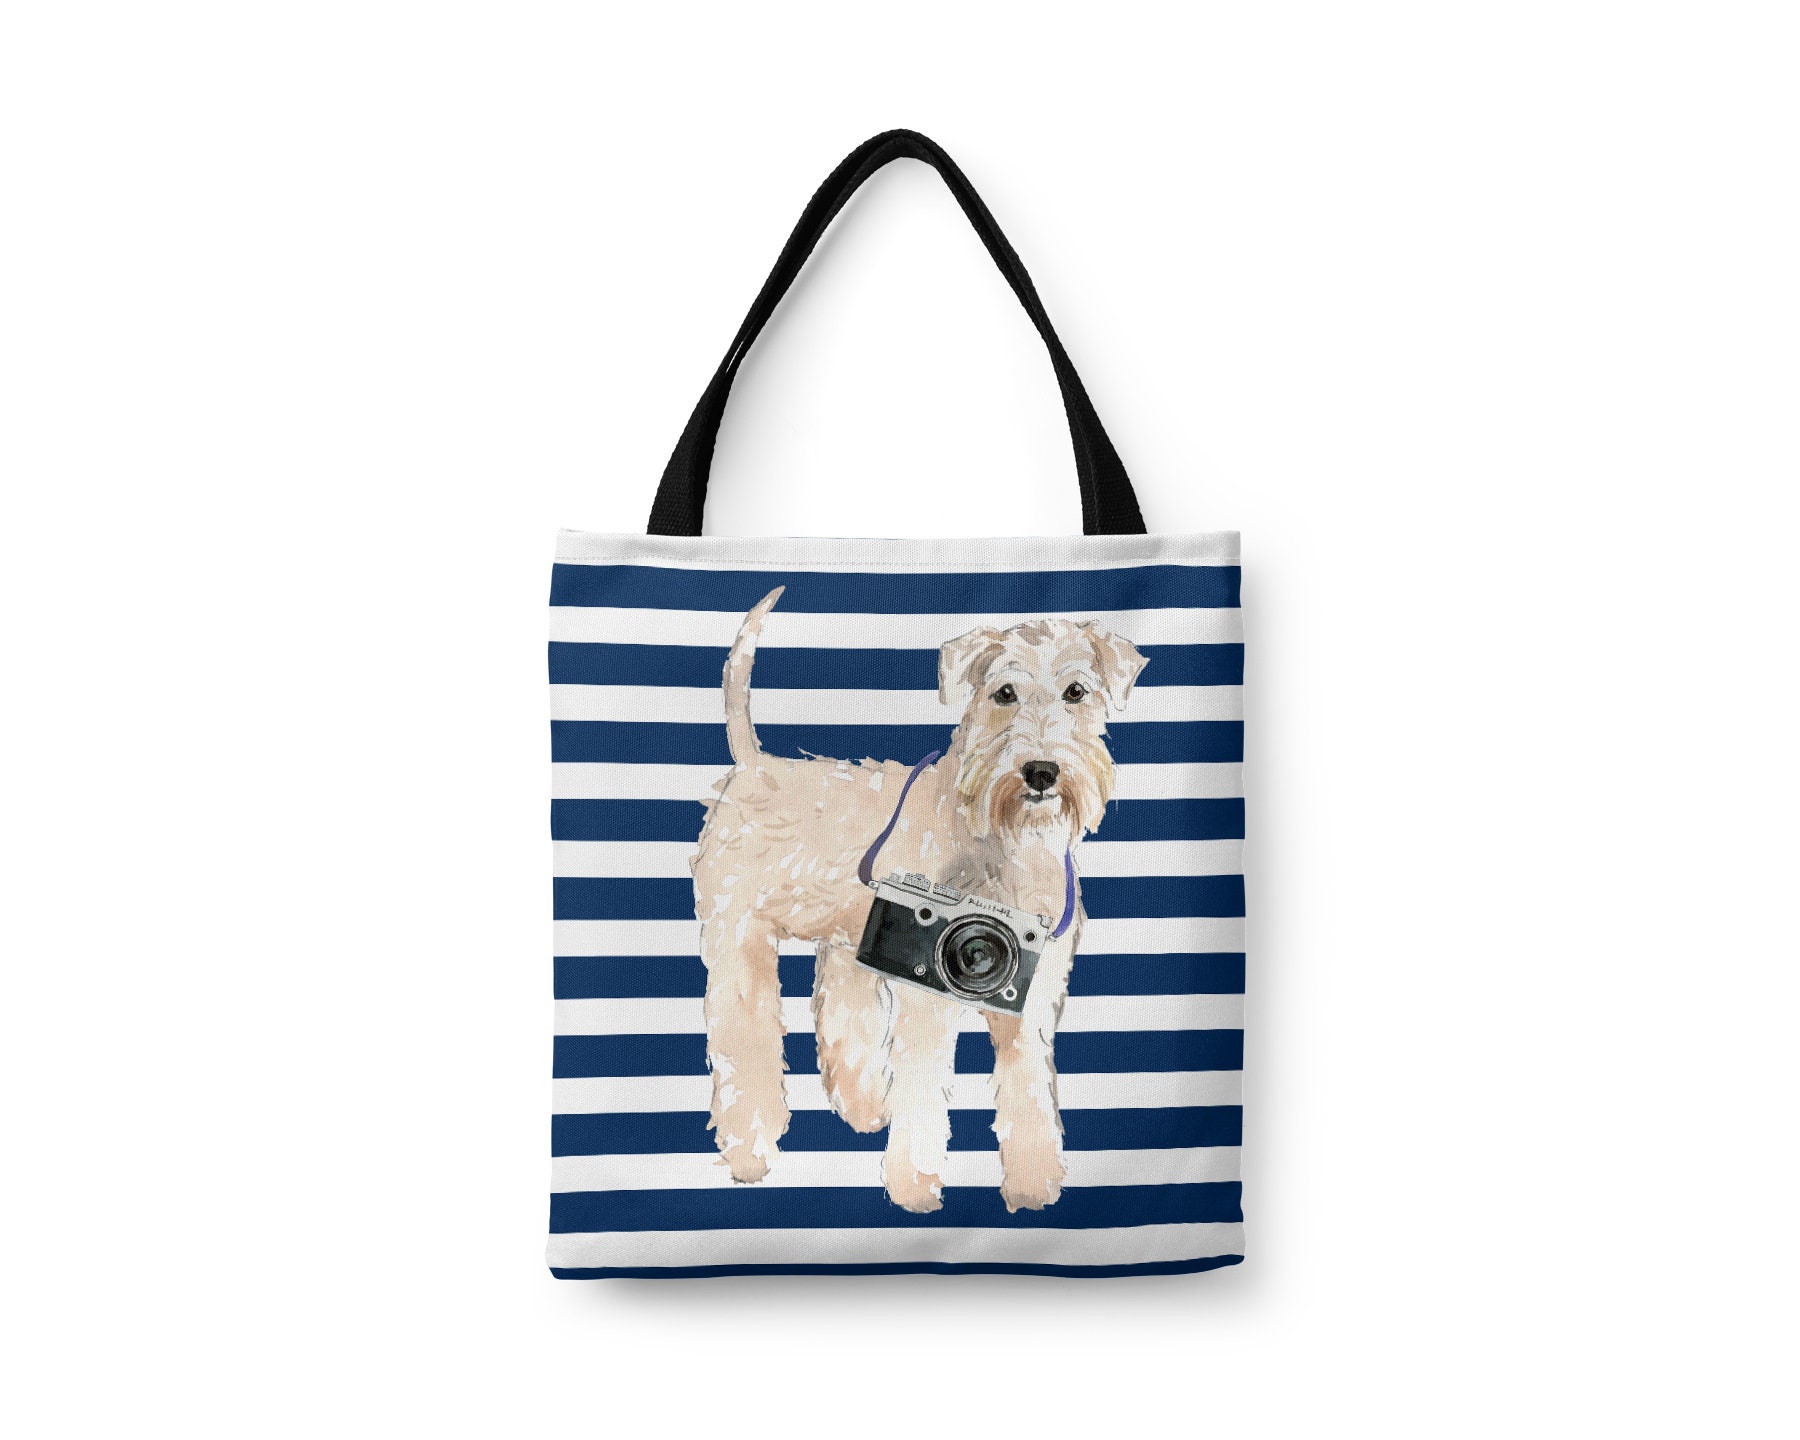 Wheaten Terrier Dog Tote Bag Illustrated Dogs & 6 Travel Inspired Styles. All Purpose For Work & Life. Wheatie Shoulder Bag